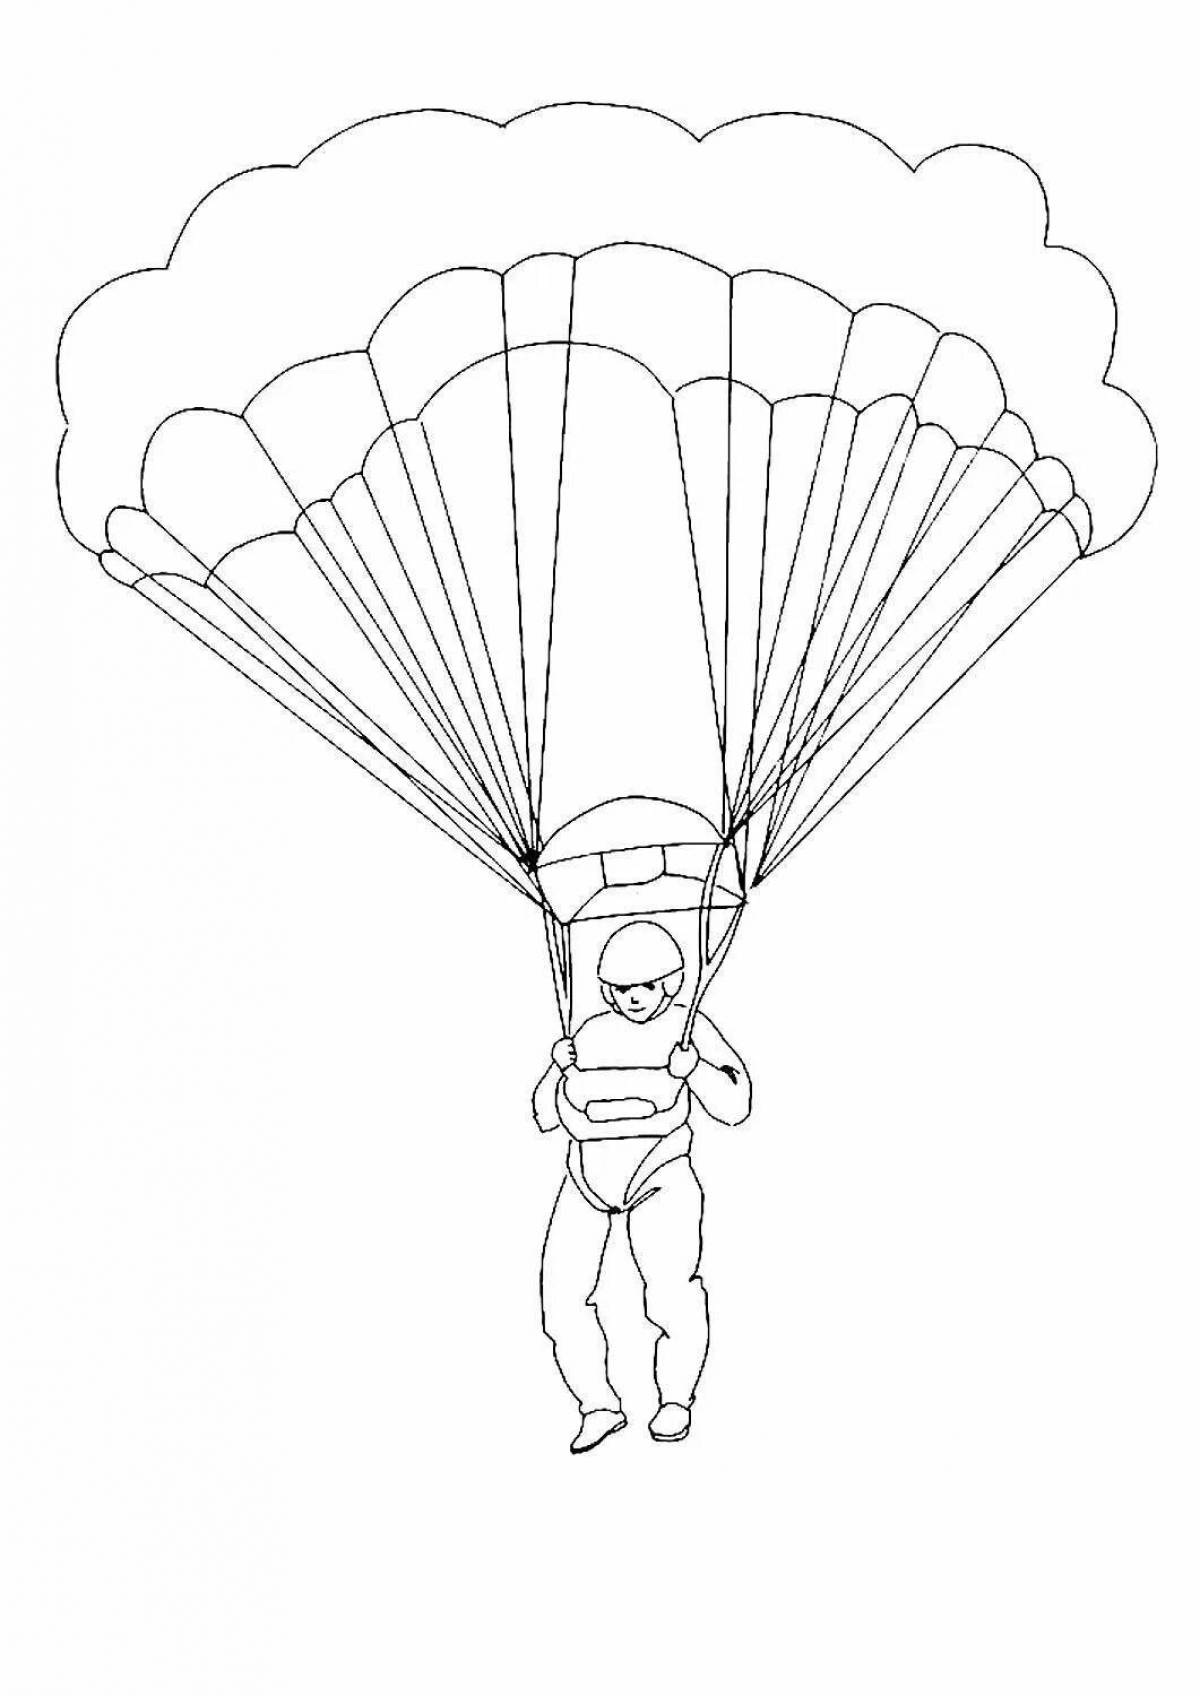 Playful military parachutist coloring page for kids